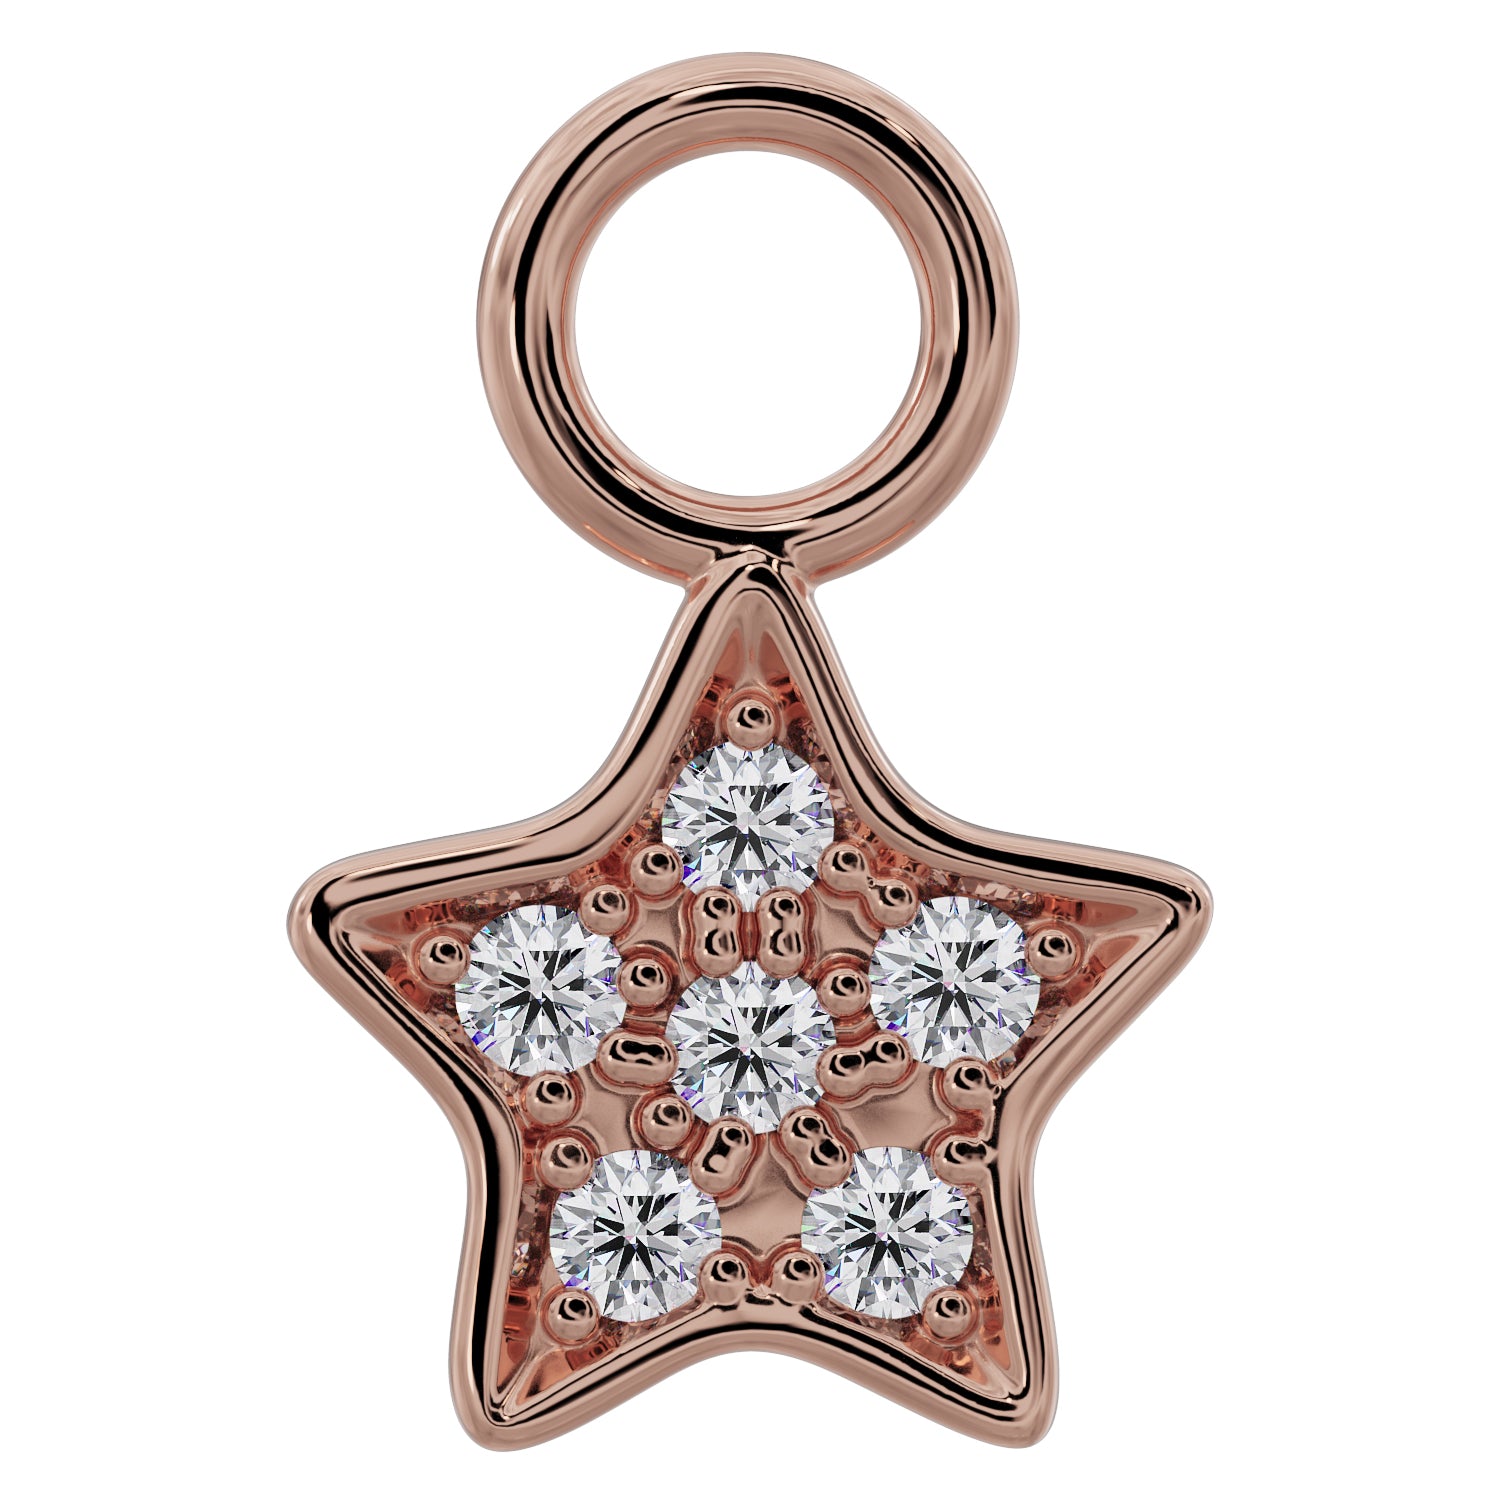 Star Diamond Pave Charm Accessory for Piercing Jewelry-14K Rose Gold